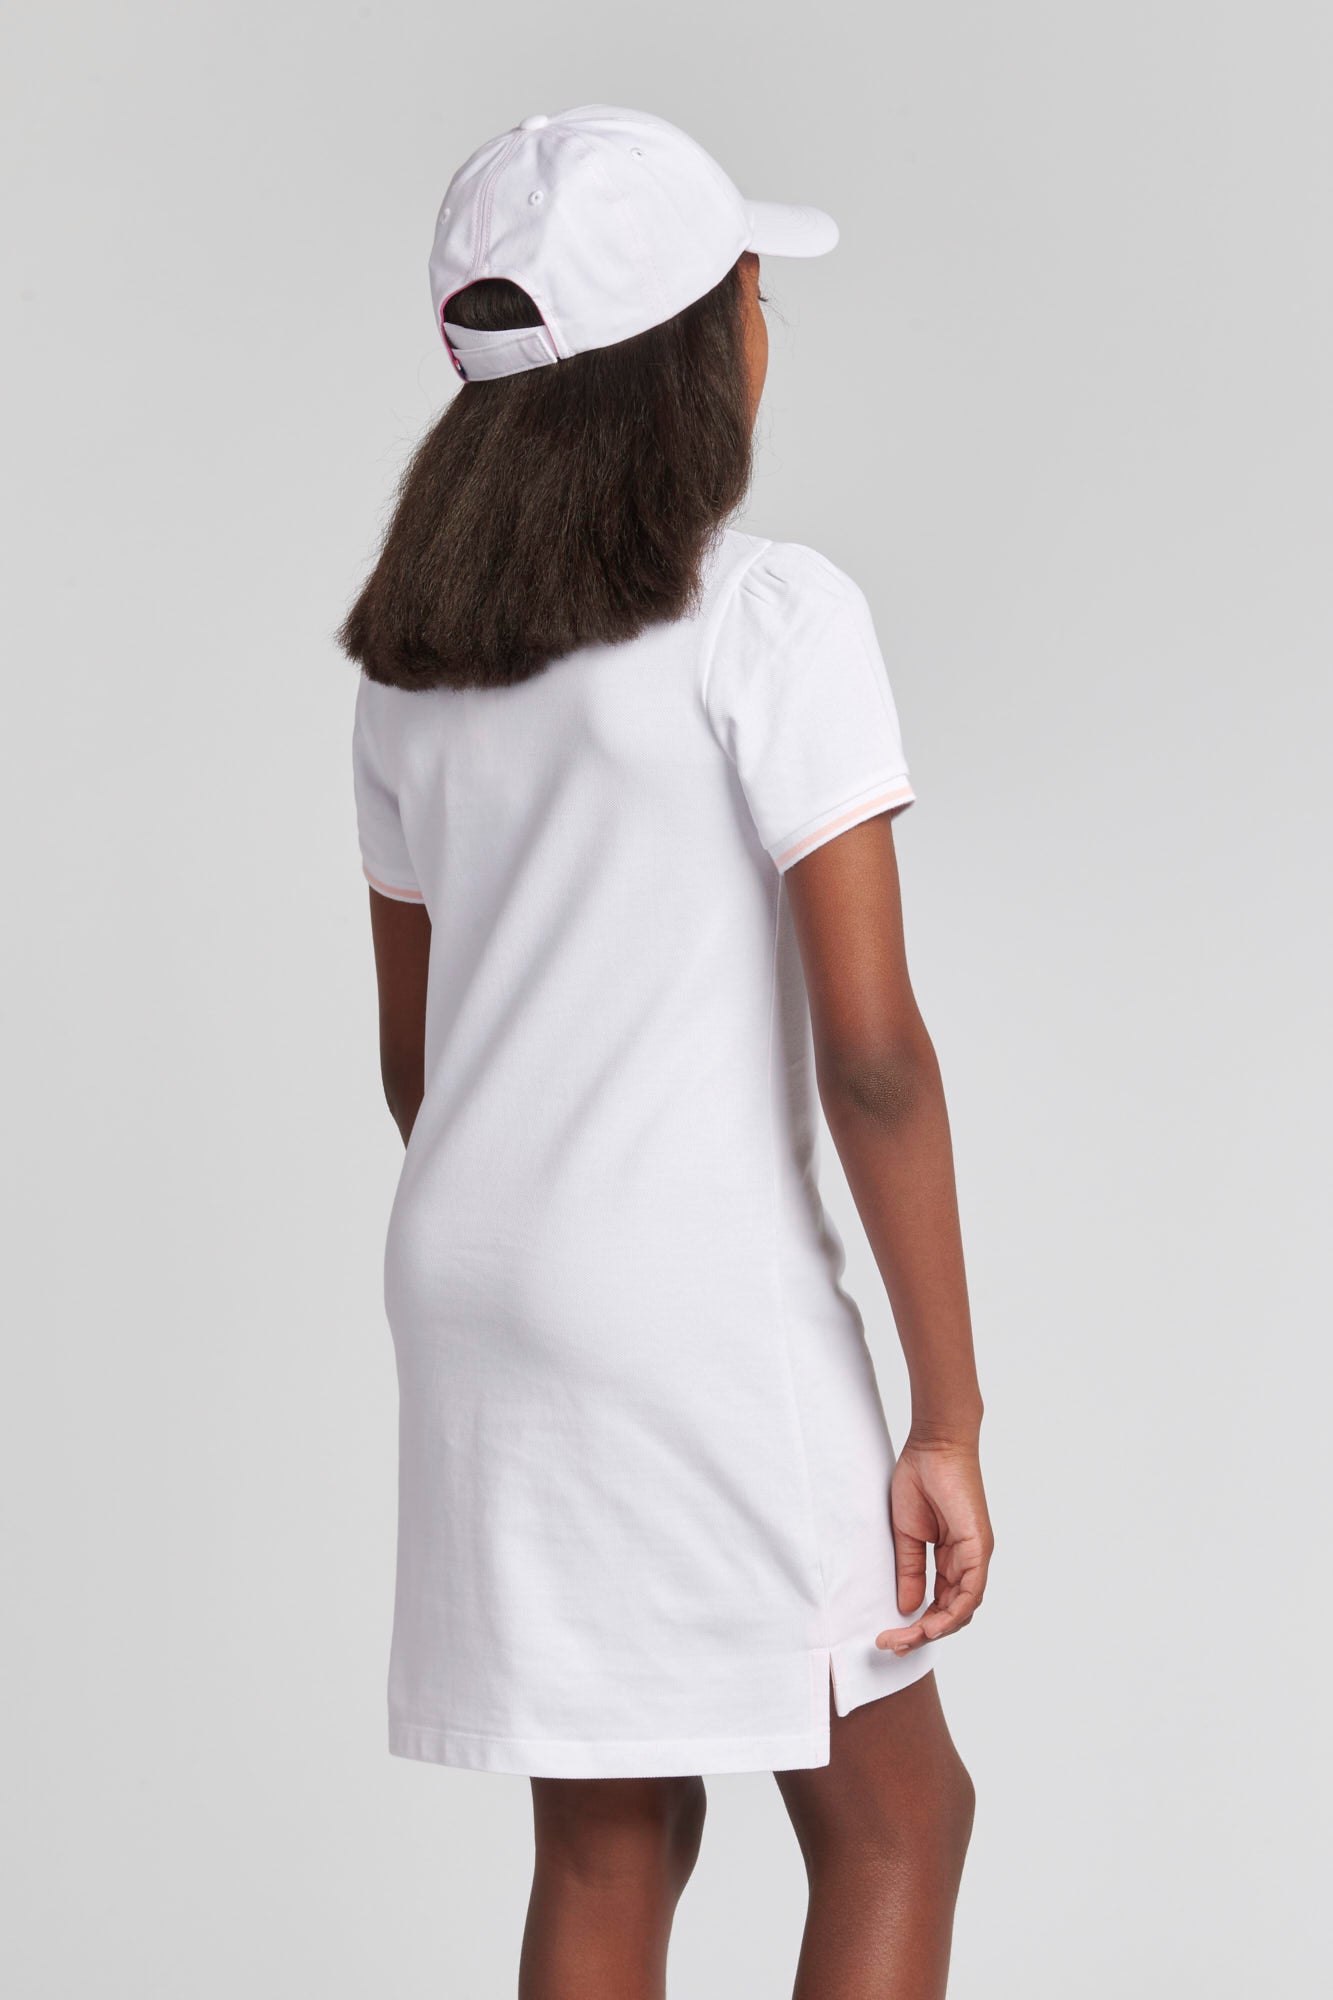 Girls Polo Dress in Bright White